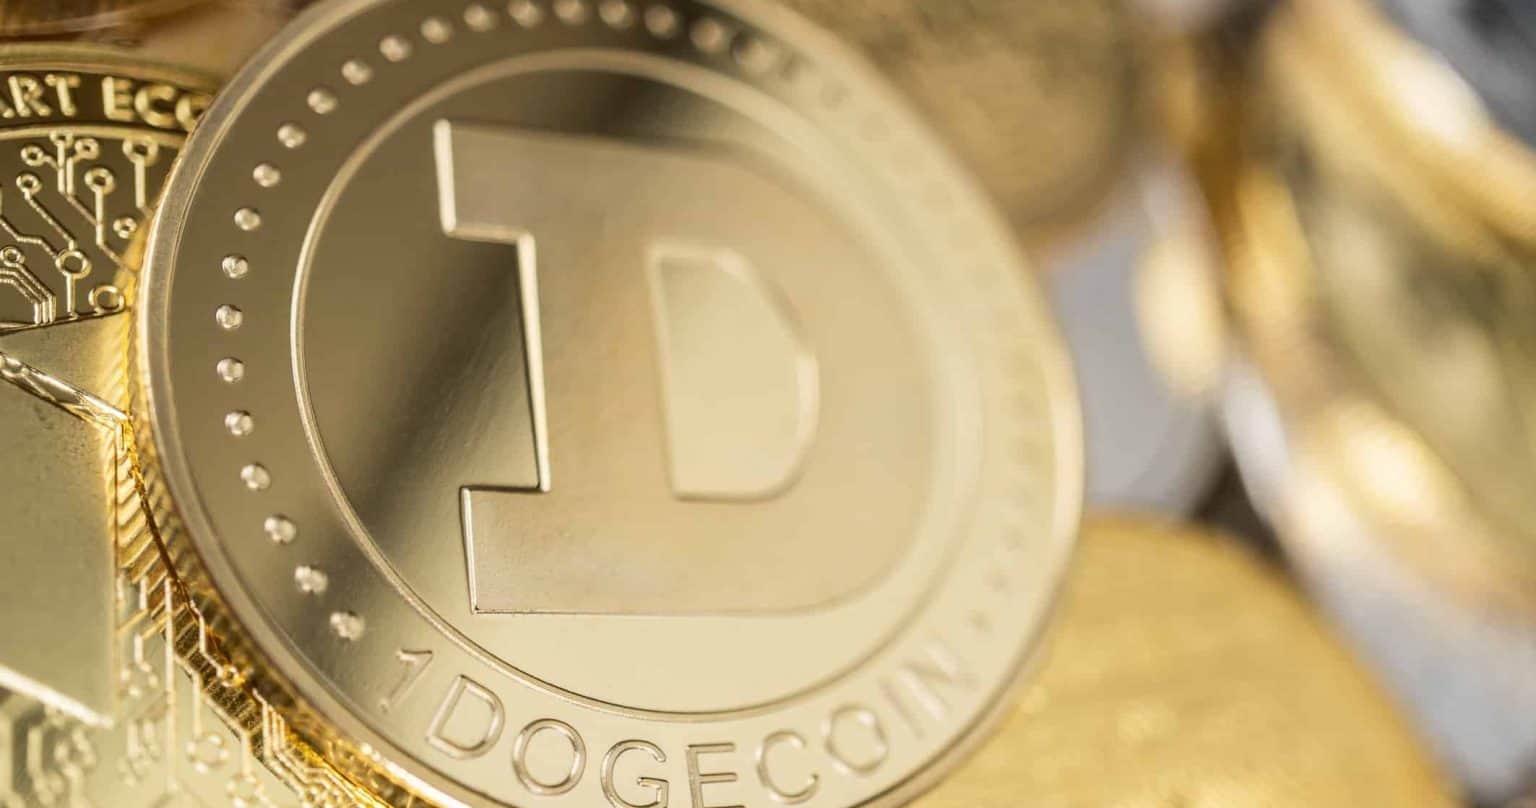 How to Sell Dogecoin (DOGE) in 2021